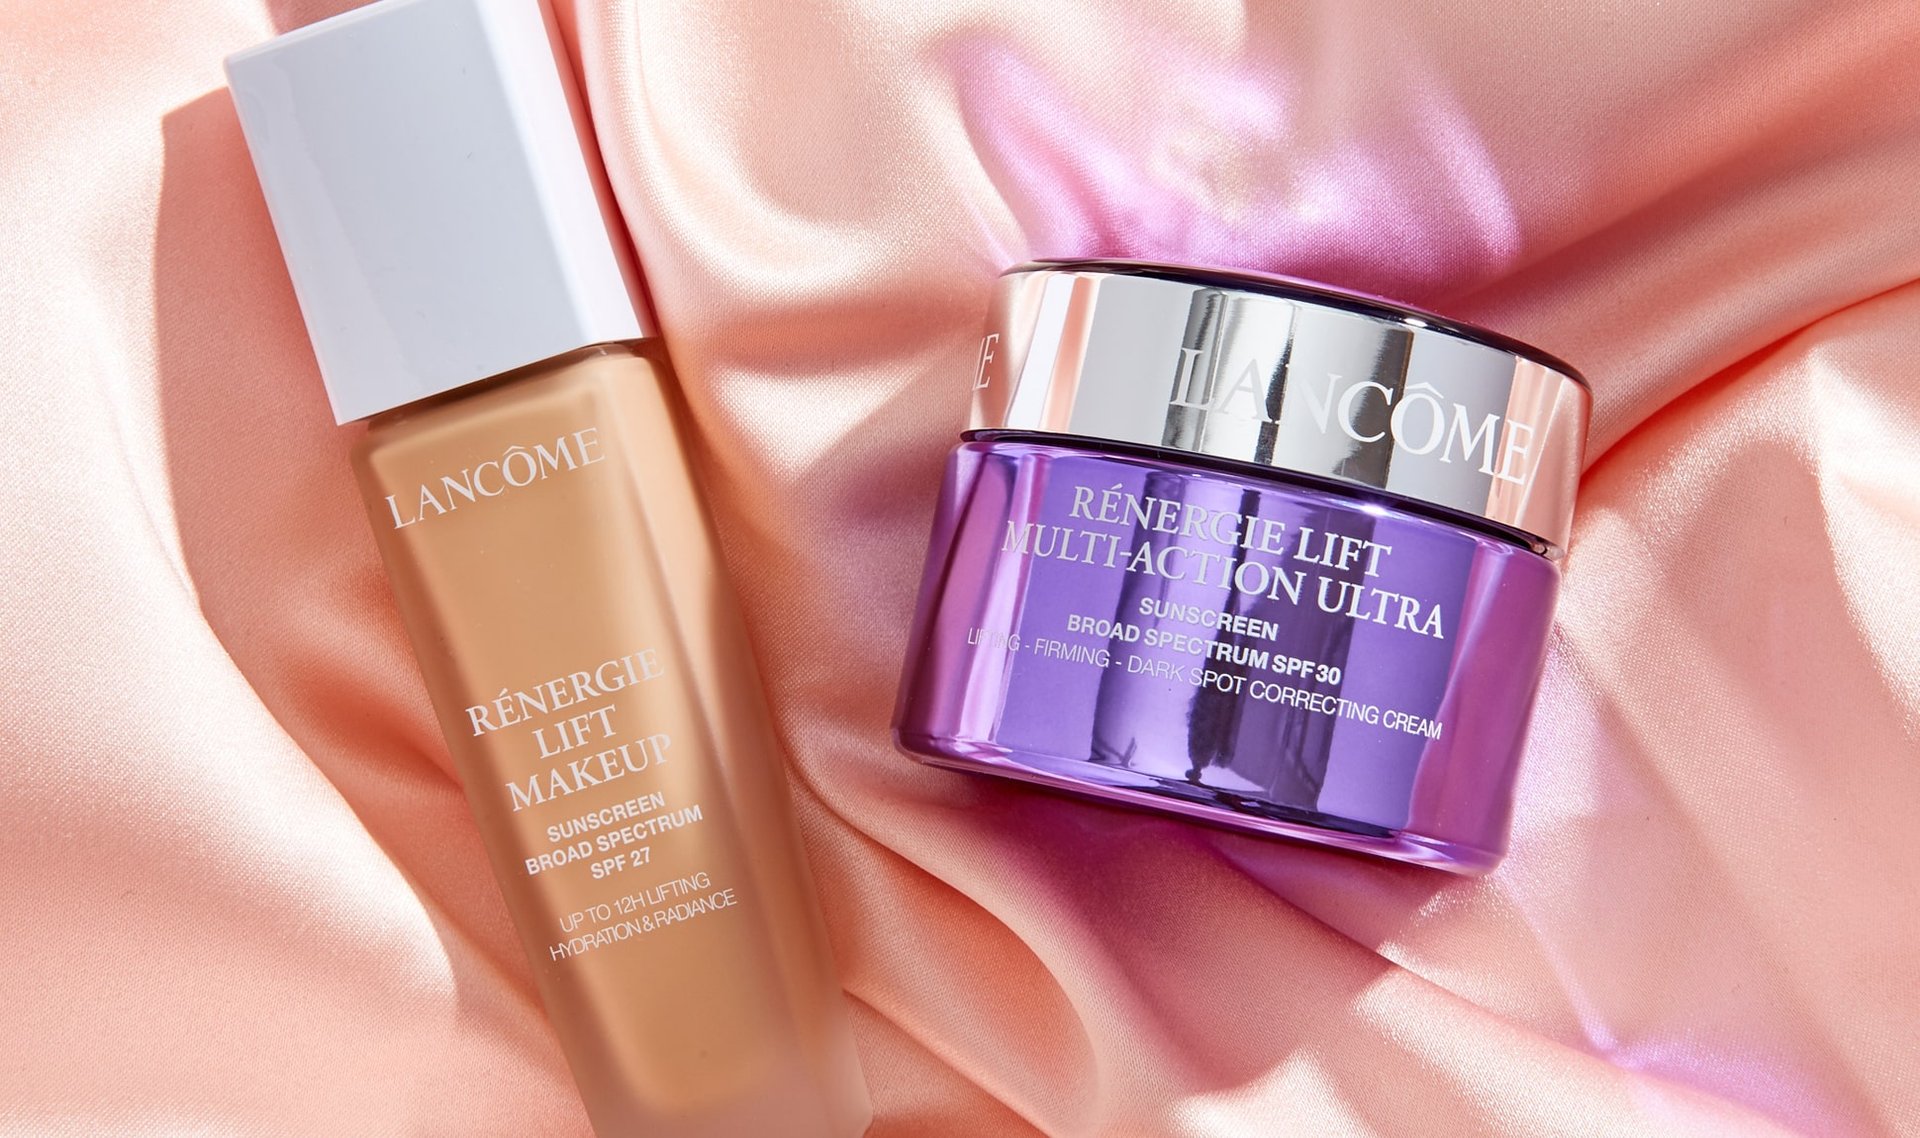 Meet Lancôme’s Newest Power Duo: Rénergie Lift Multi-Action Ultra Face Cream and Foundation 